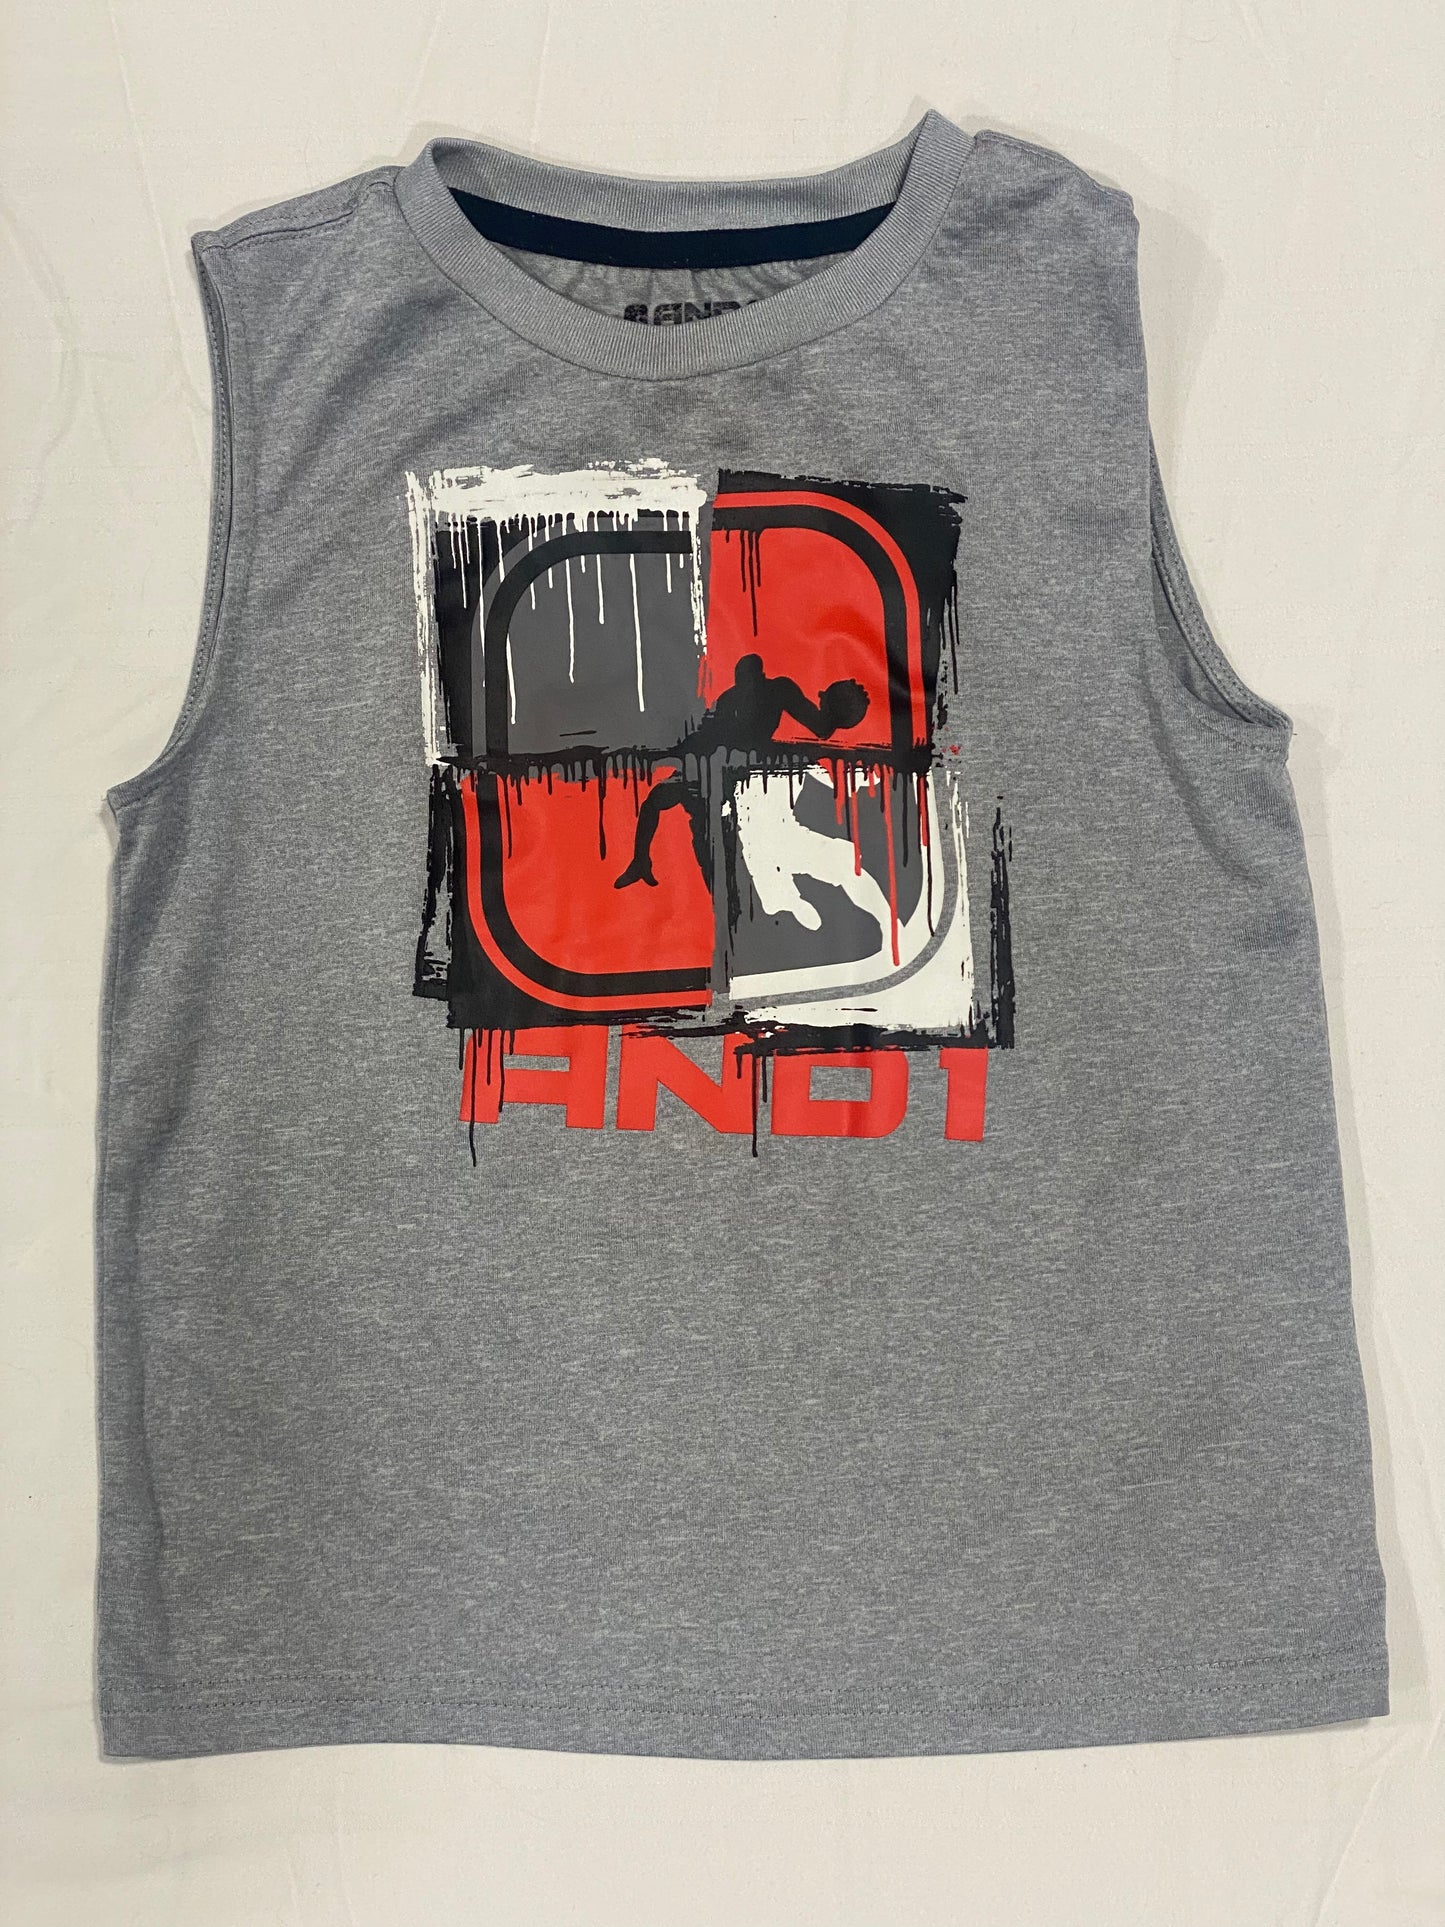 AND1 Boys 4T Gray Basketball Athletic Tank